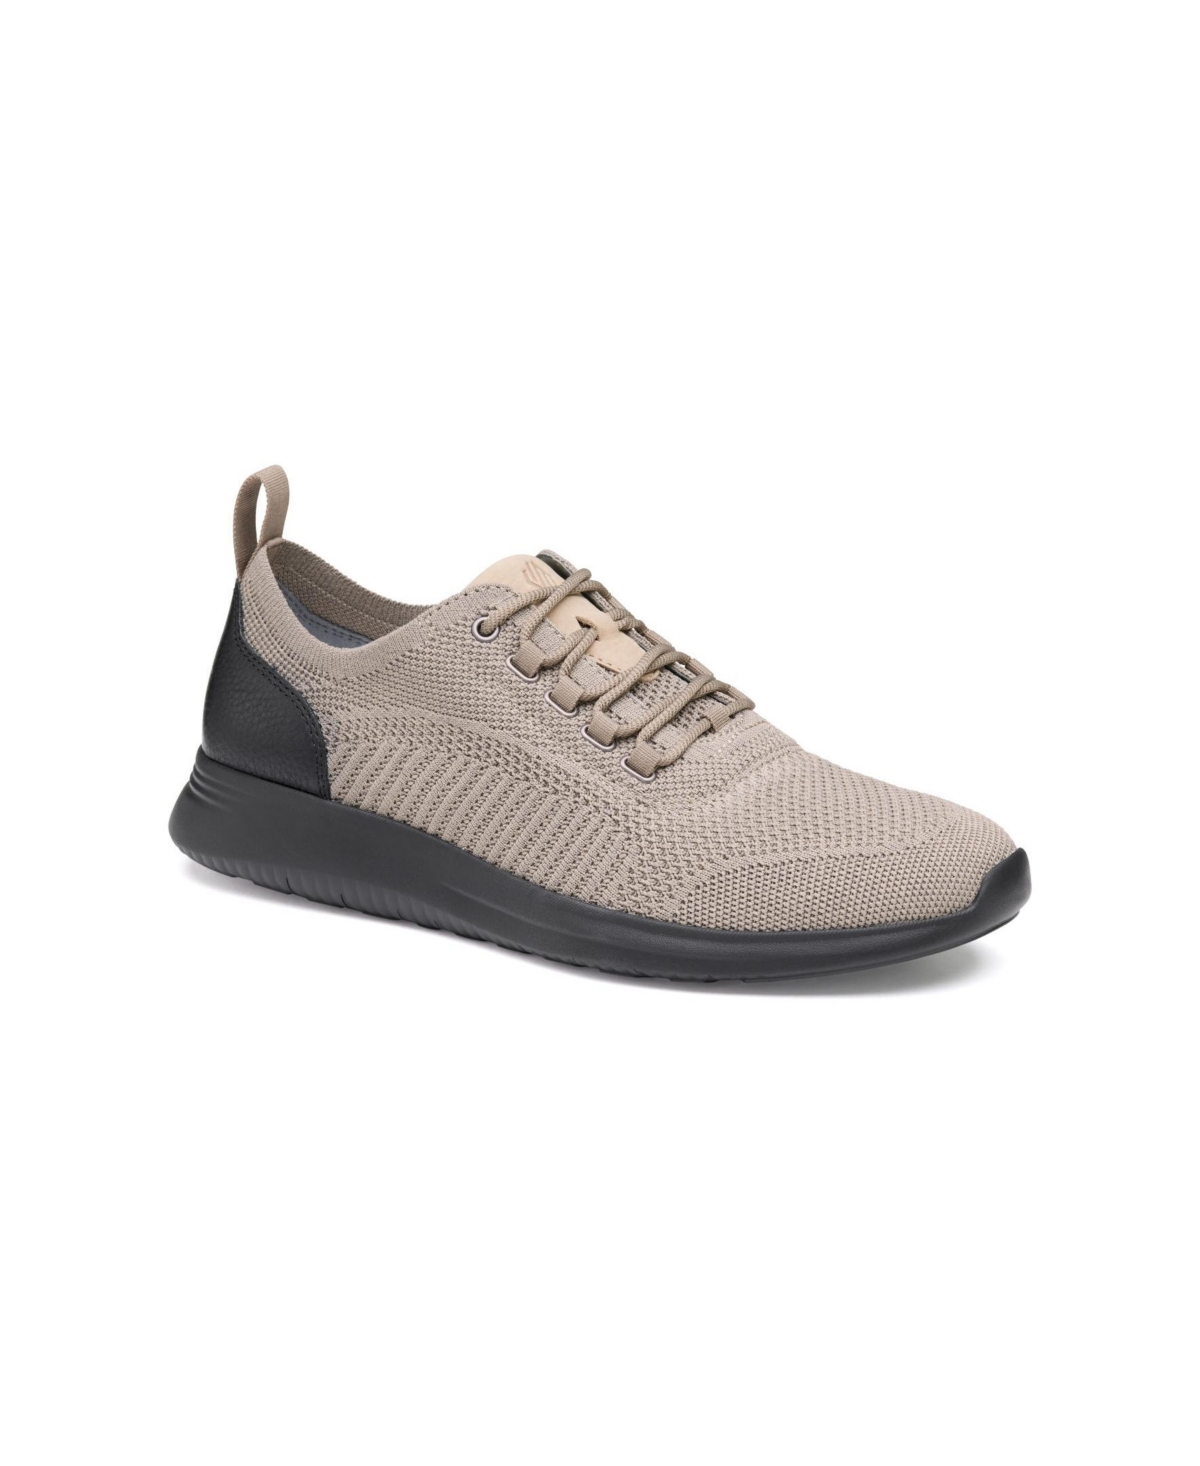 Johnston & Murphy Men's Amherst Knit U-throat Lace-up Shoes In Taupe Knit